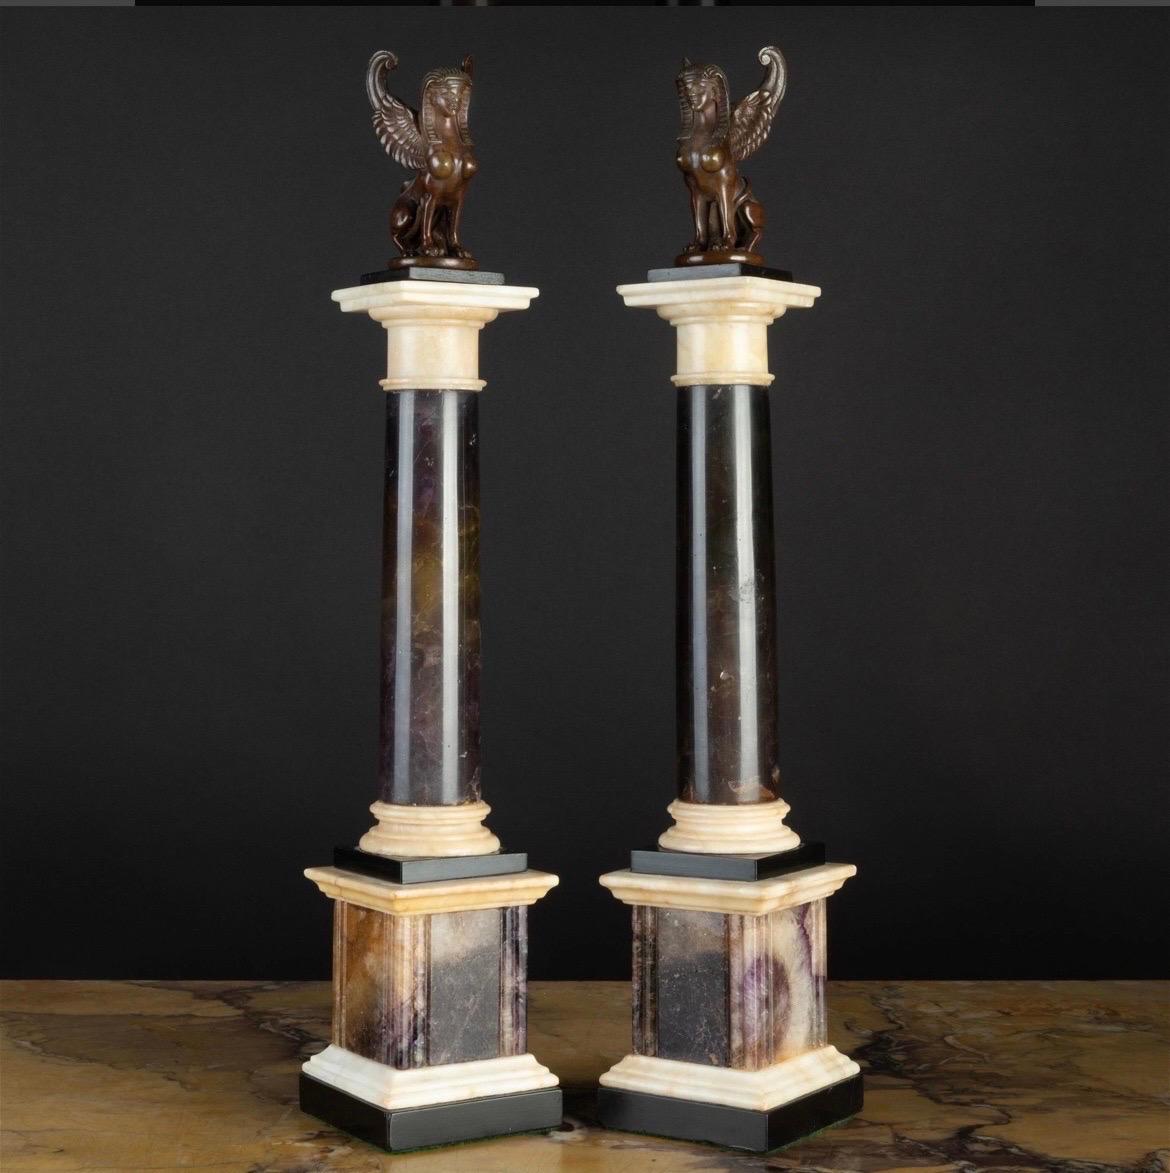 English, 19th century.


An exceptional and rare pair of Grand Tour period Neoclassical columns. Each column has a stepped bronze and white marble plinth and base that is separated by a carved Blue John pedestal which all support a solid Blue John